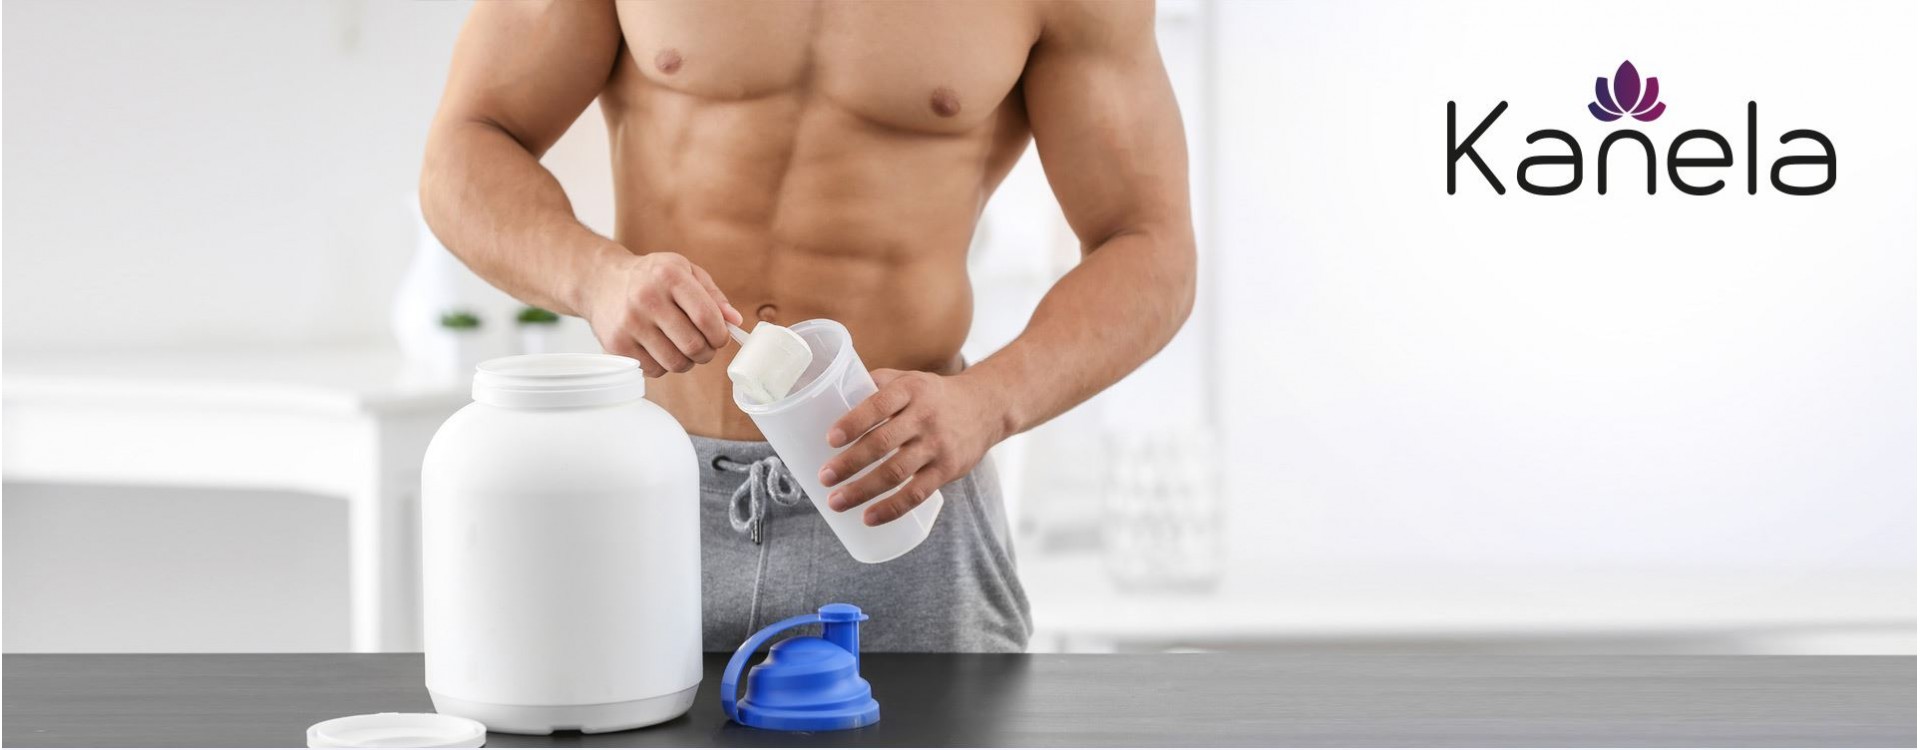 Which protein products help build muscle?